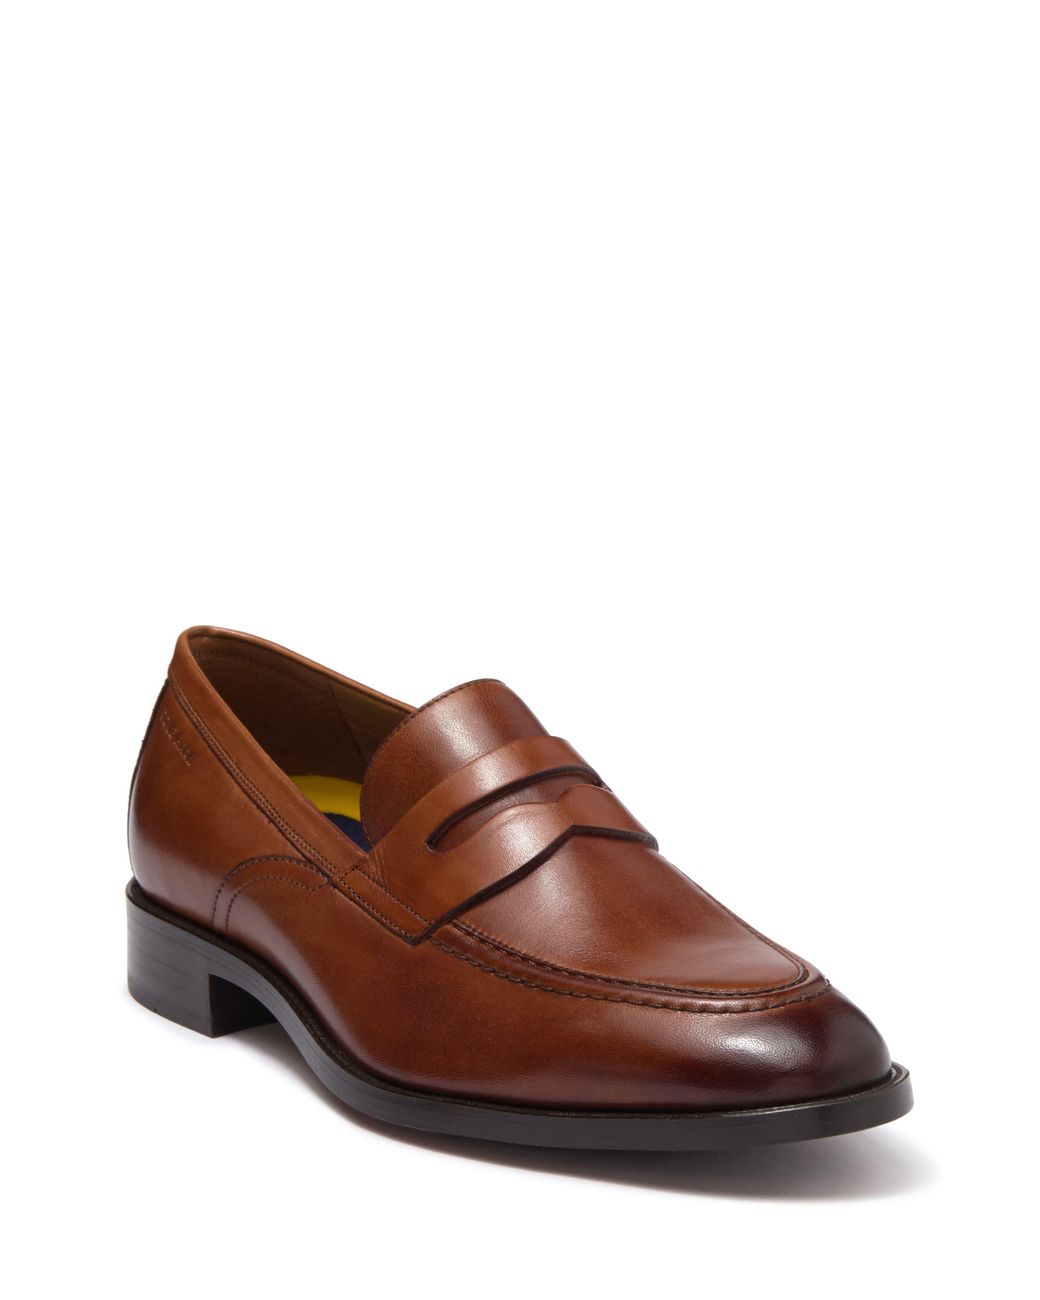 Cole Haan Leather Hawthorne Penny Loafer in Brown for Men - Lyst